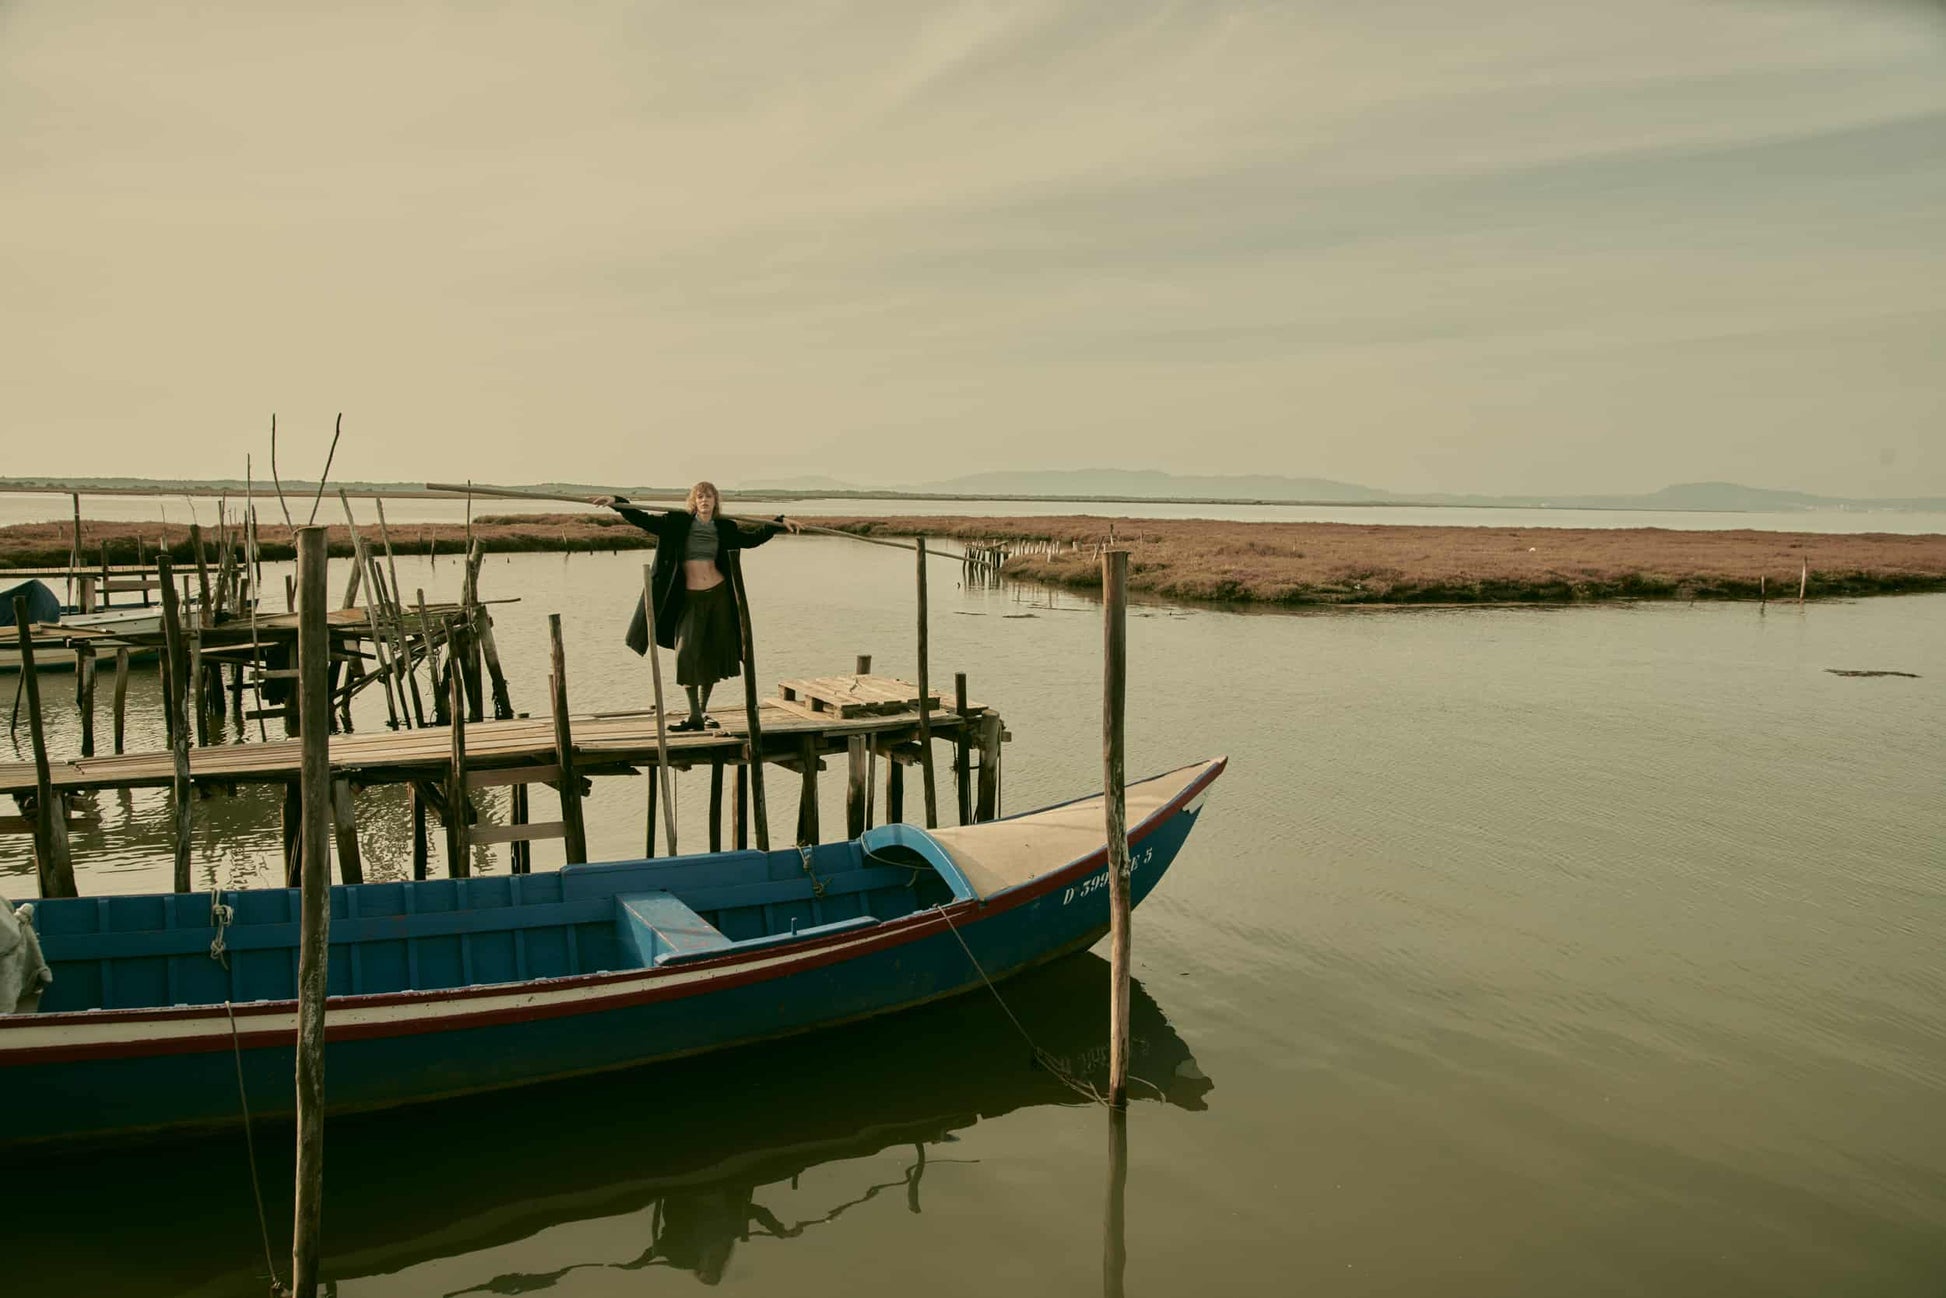 The artpiece 'Embrace' by Andreas Ortner shows a few wooden piers in a lake with a blue fishing boat in the front. A woman is standing on a pier with her arms widespread.